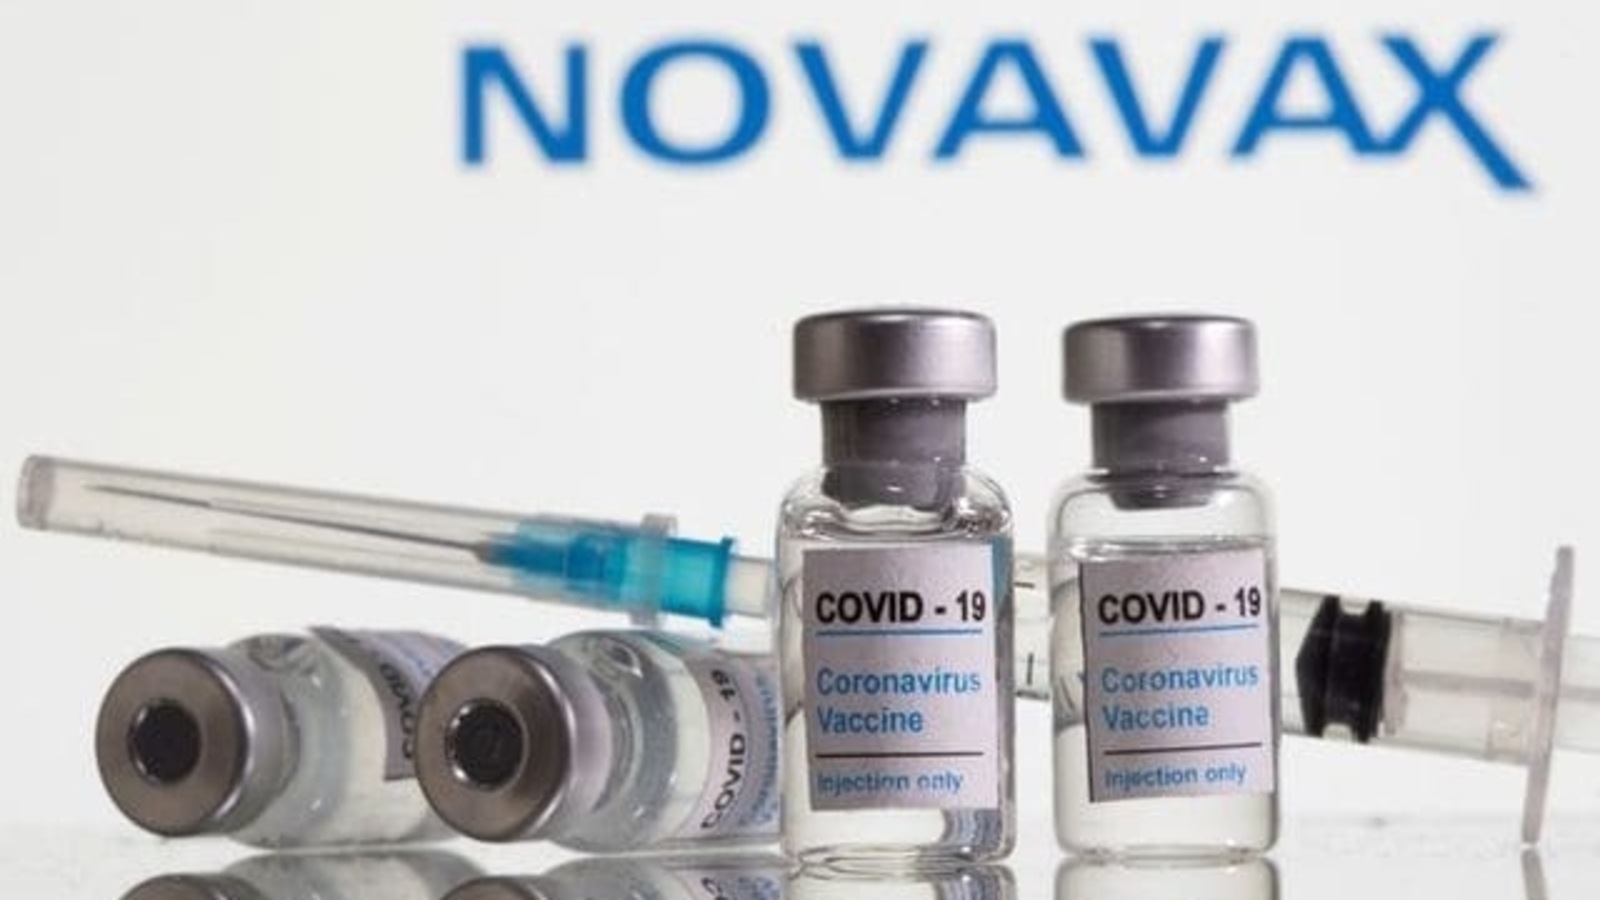 Novavax COVID-19 vaccine receives its first emergency use authorization |  World News - Hindustan Times